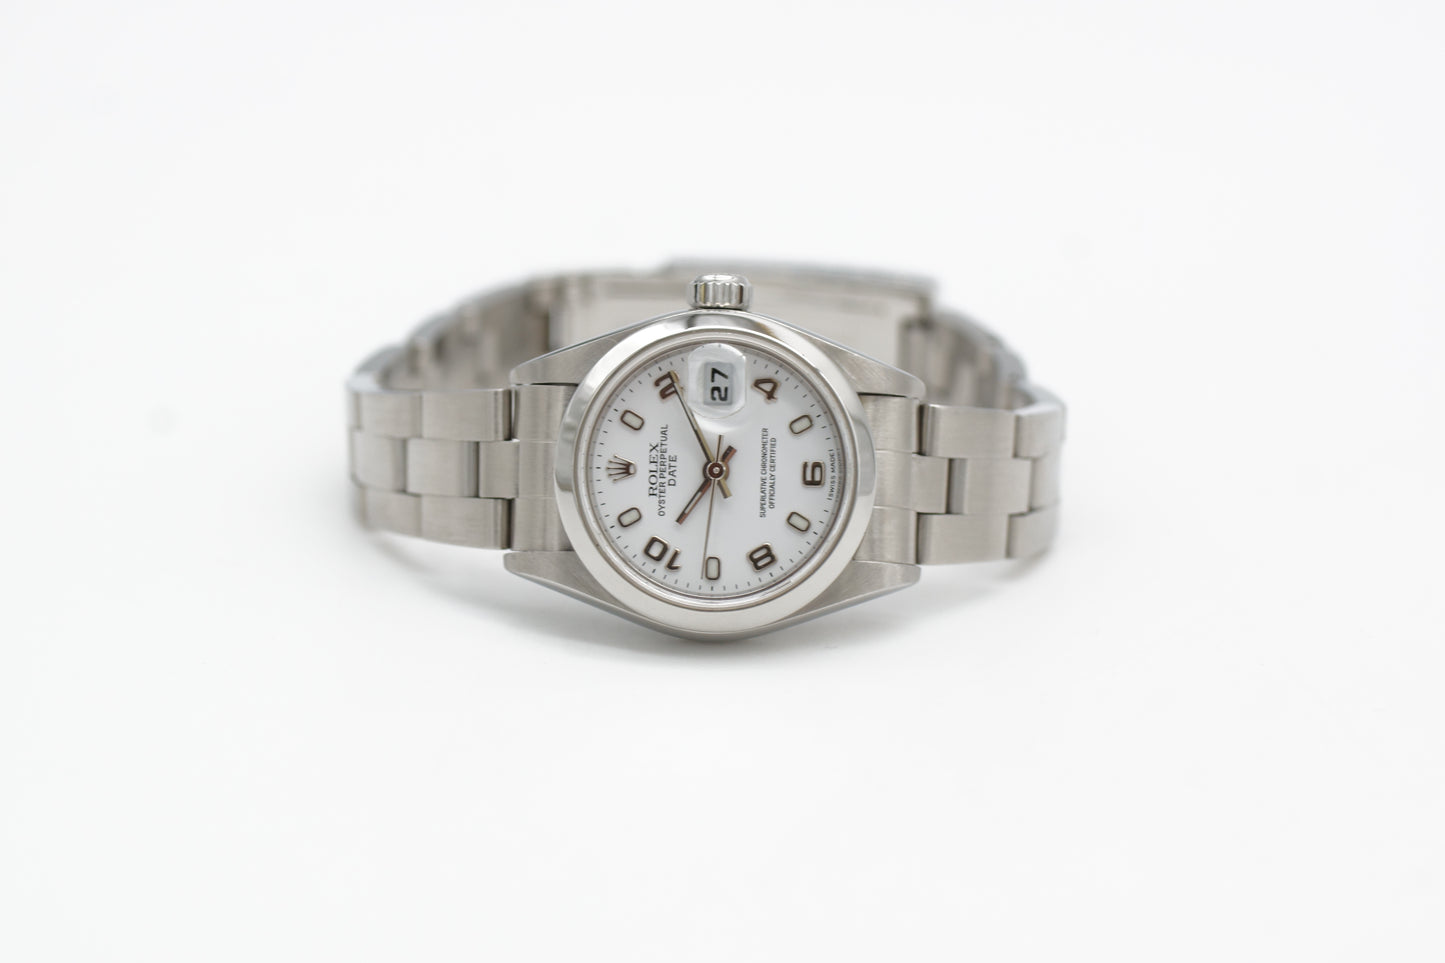 Lady Oyster Perpetual Date 79160 26 Box/Papiere 2000